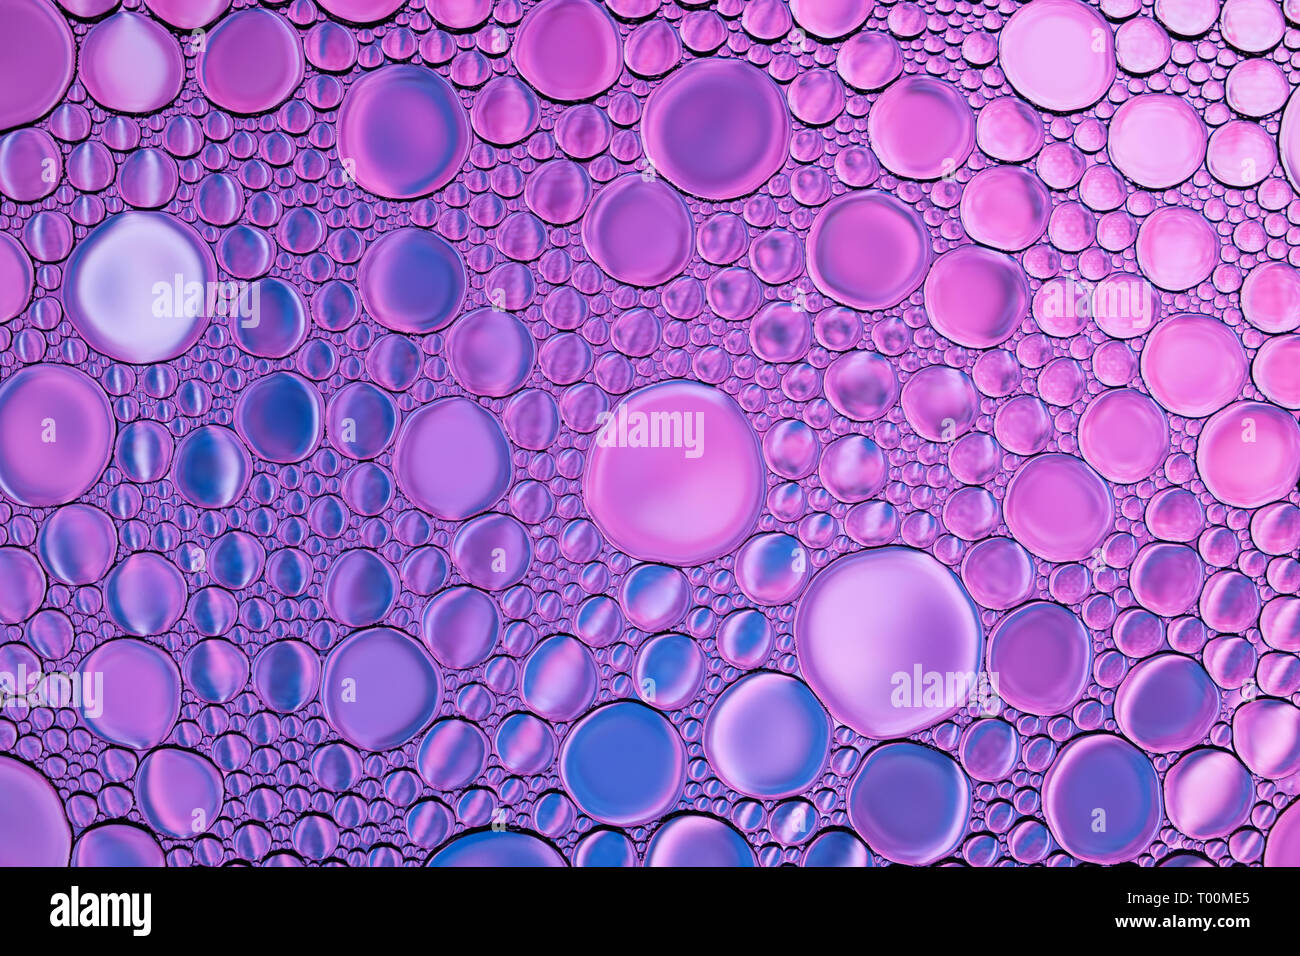 Bright abstract bubbles or water drops background. Natural backdrop. Stock Photo